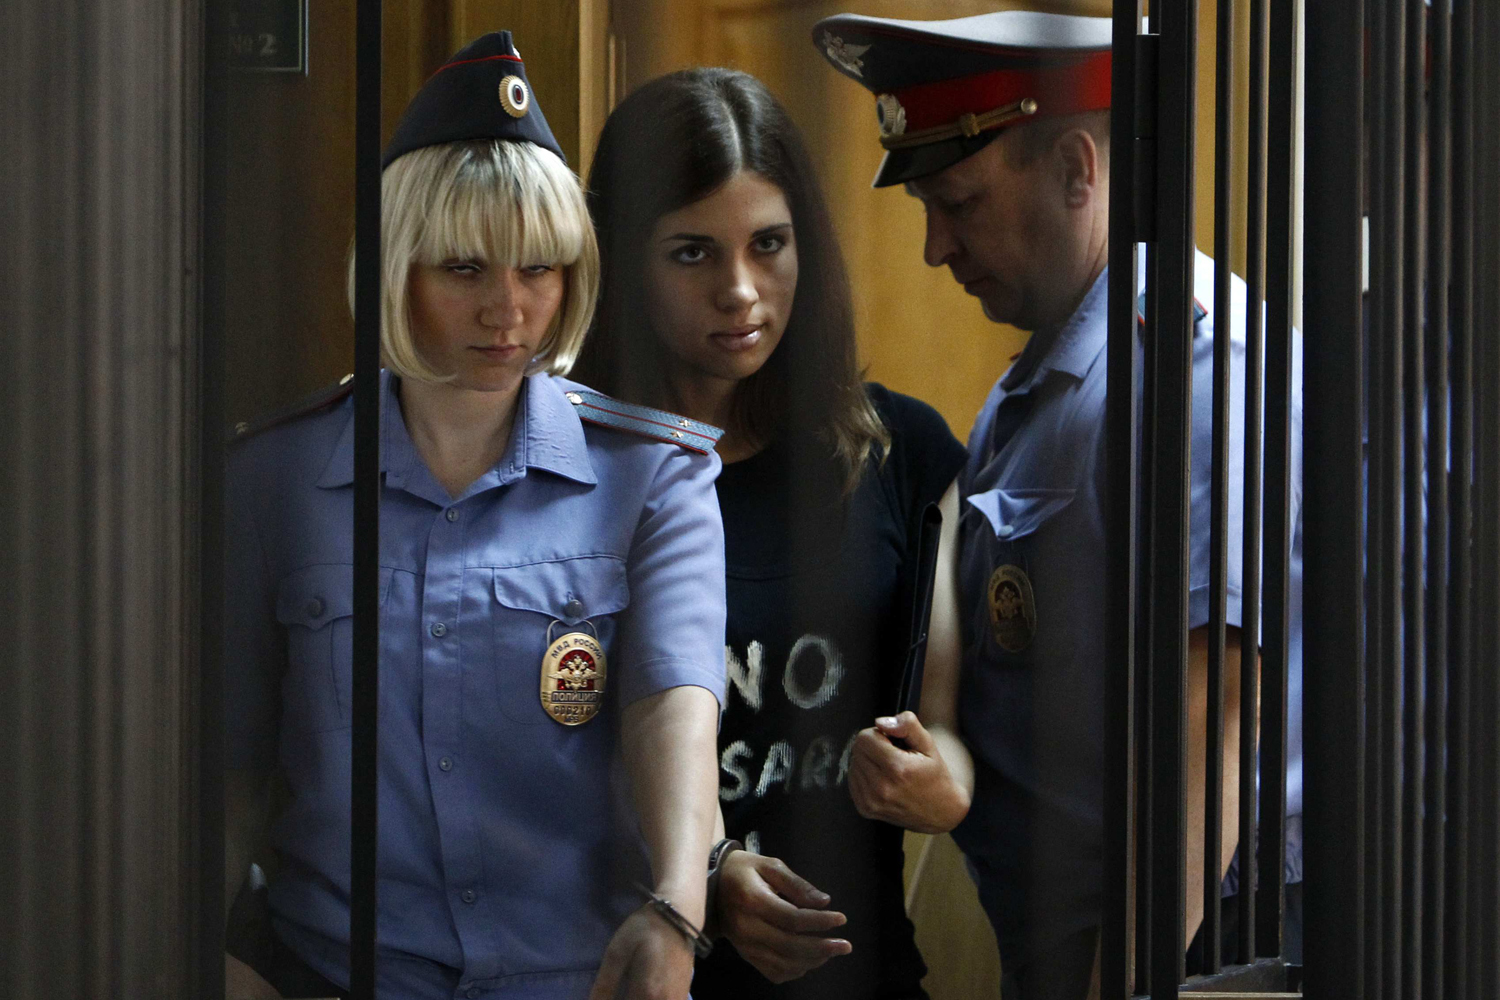 Member of the female punk band "Pussy Riot" Tolokonnikova is escorted before a court hearing to appeal for parole at the Supreme Court of Mordovia in Saransk